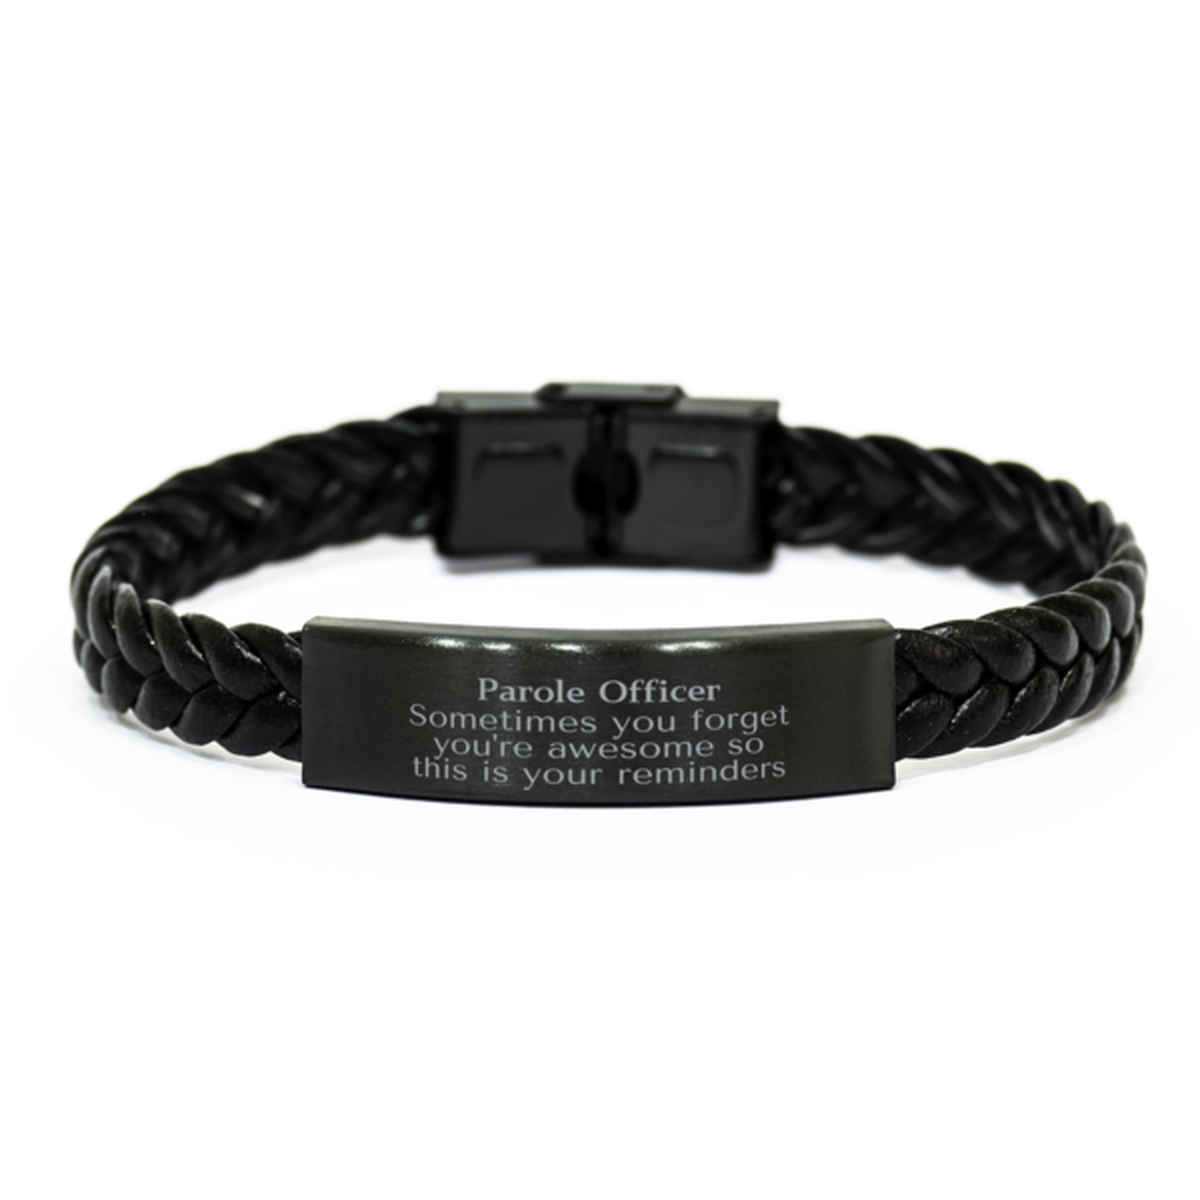 Sentimental Parole Officer Braided Leather Bracelet, Parole Officer Sometimes you forget you're awesome so this is your reminders, Graduation Christmas Birthday Gifts for Parole Officer, Men, Women, Coworkers